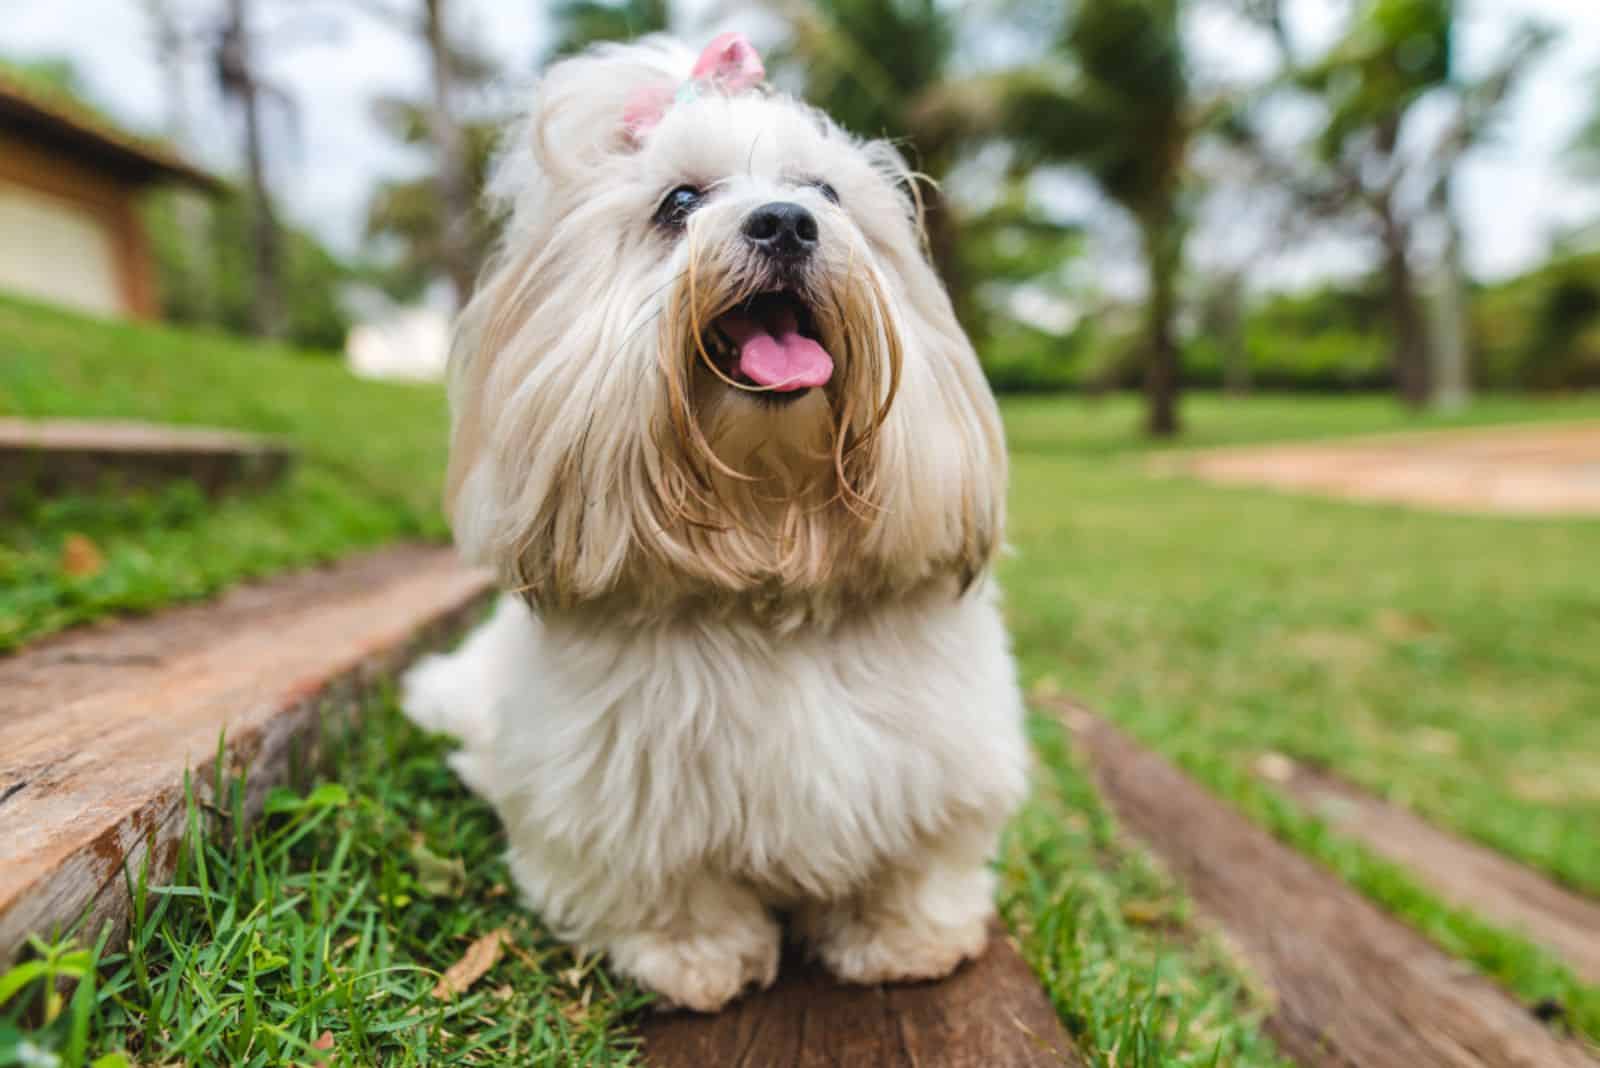 Lhasa Apso lies on a wooden base